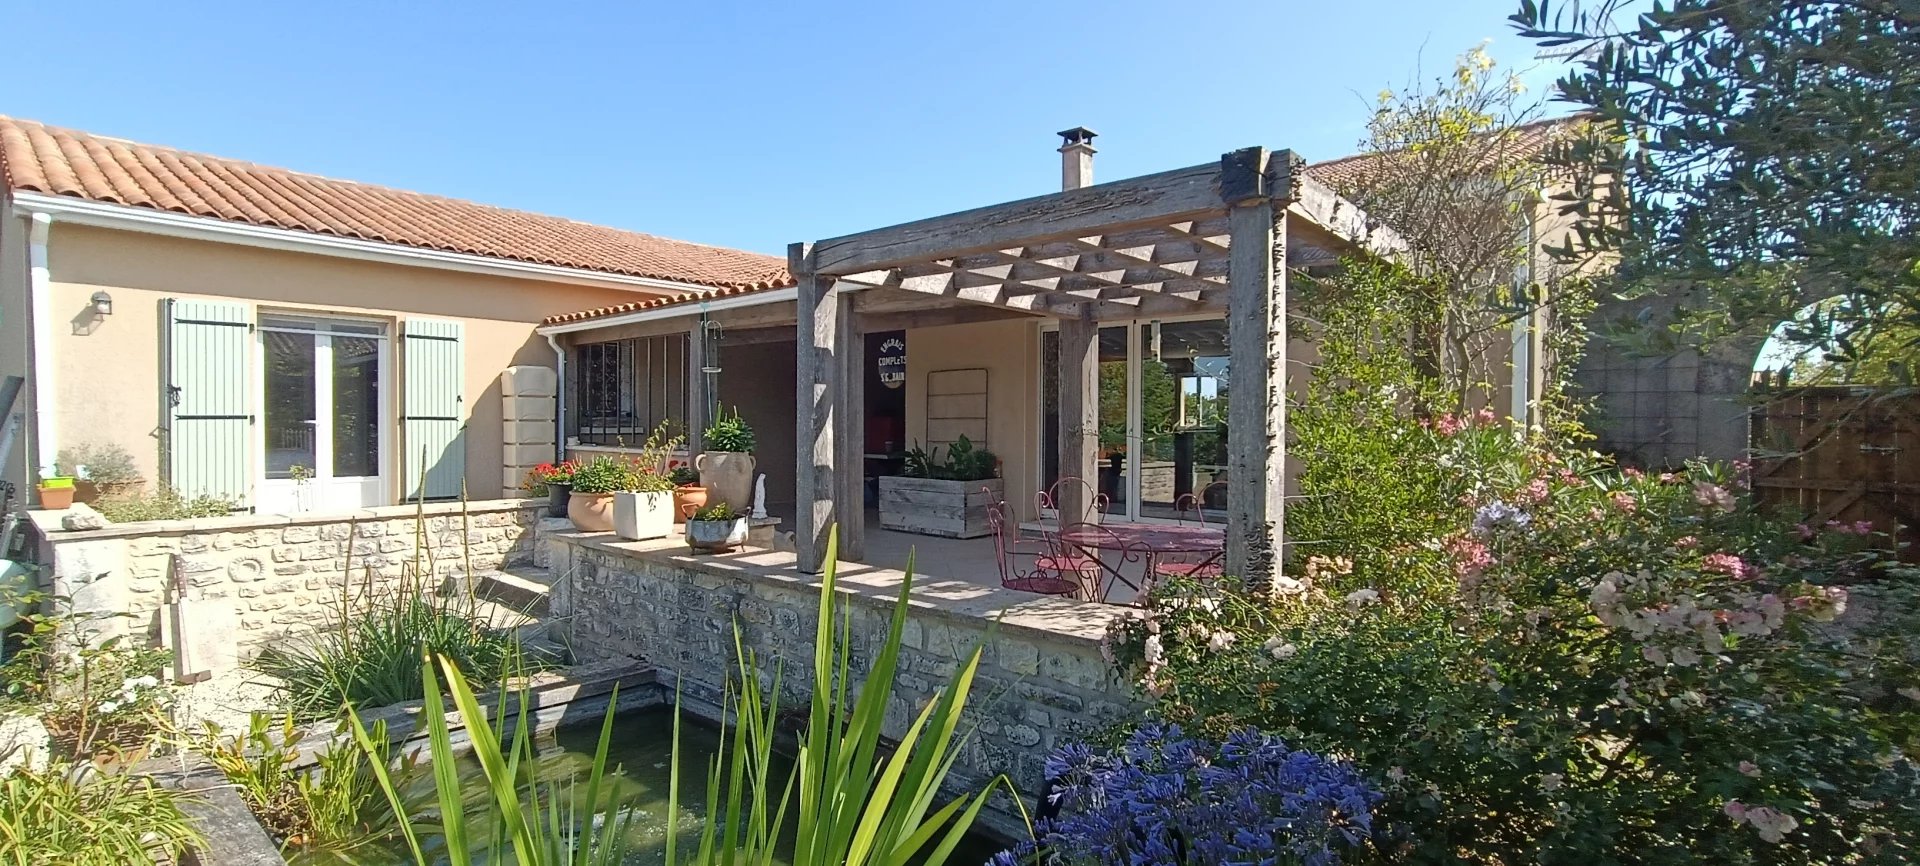 Magnificent 4 bed bungalow with large garden in Verteuil